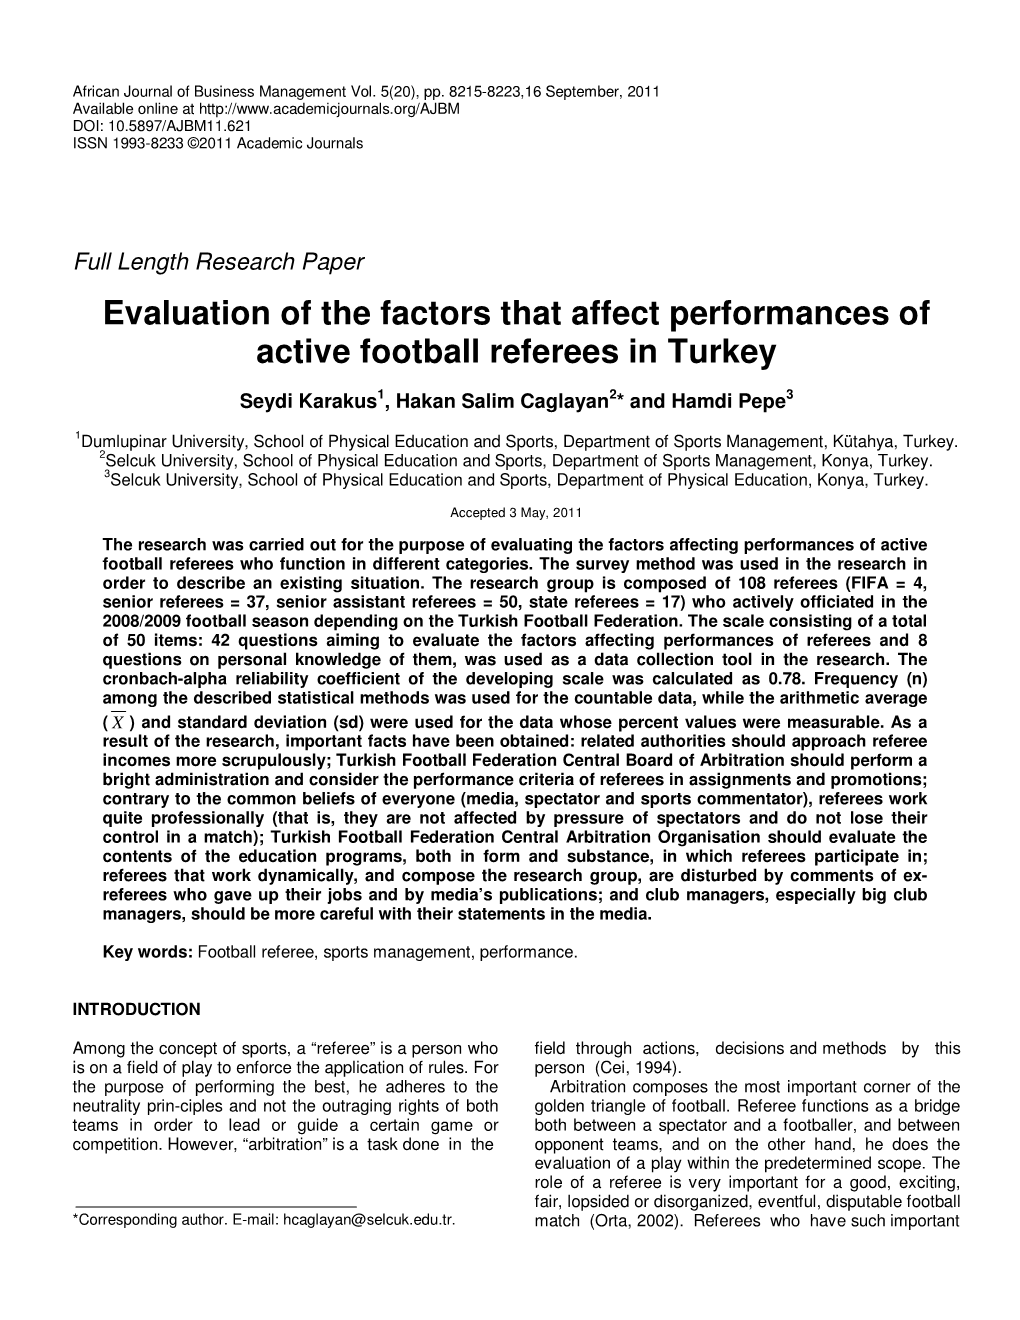 Evaluation of the Factors That Affect Performances of Active Football Referees in Turkey